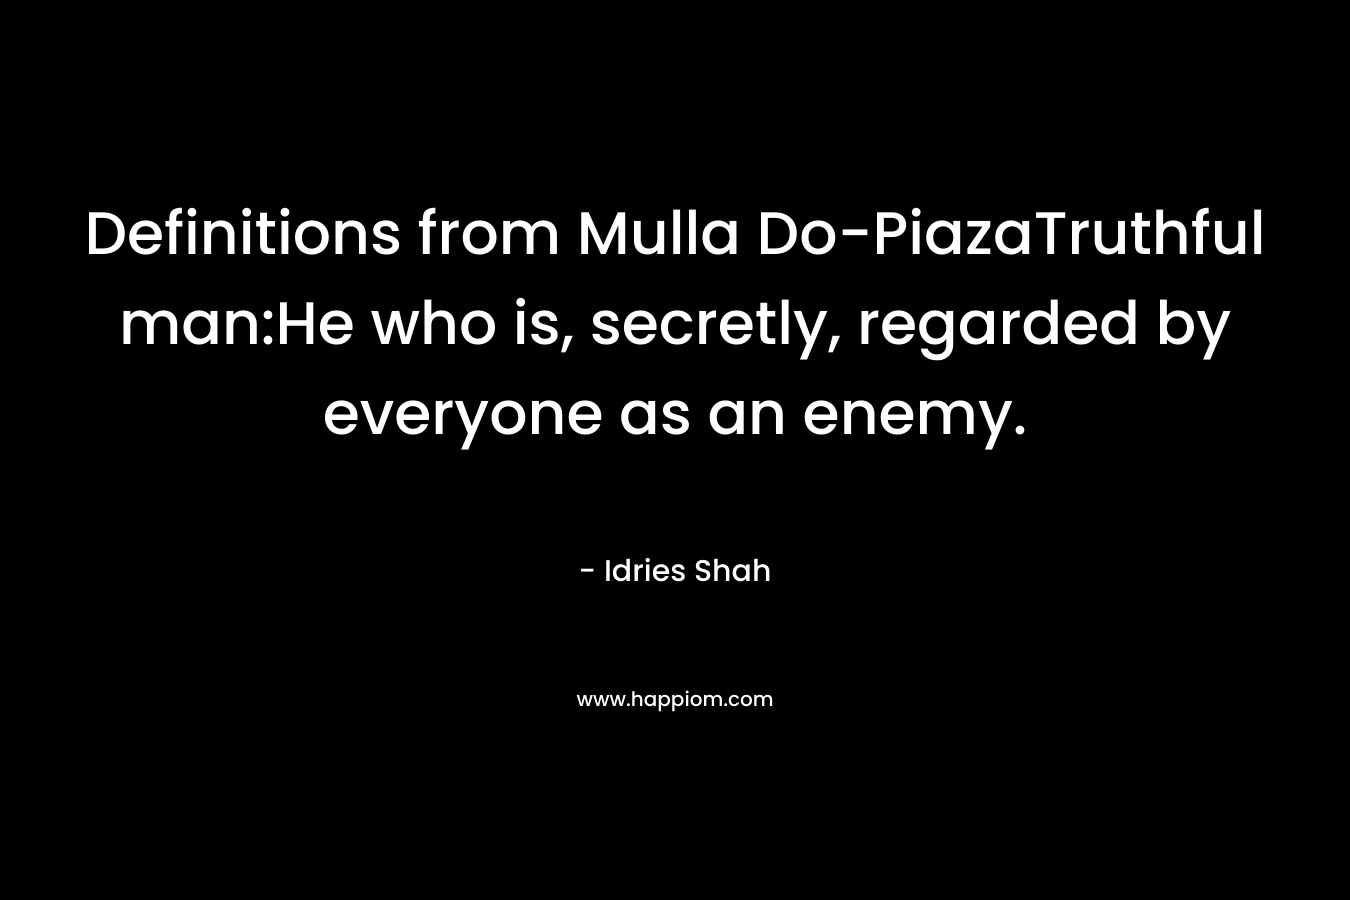 Definitions from Mulla Do-PiazaTruthful man:He who is, secretly, regarded by everyone as an enemy.